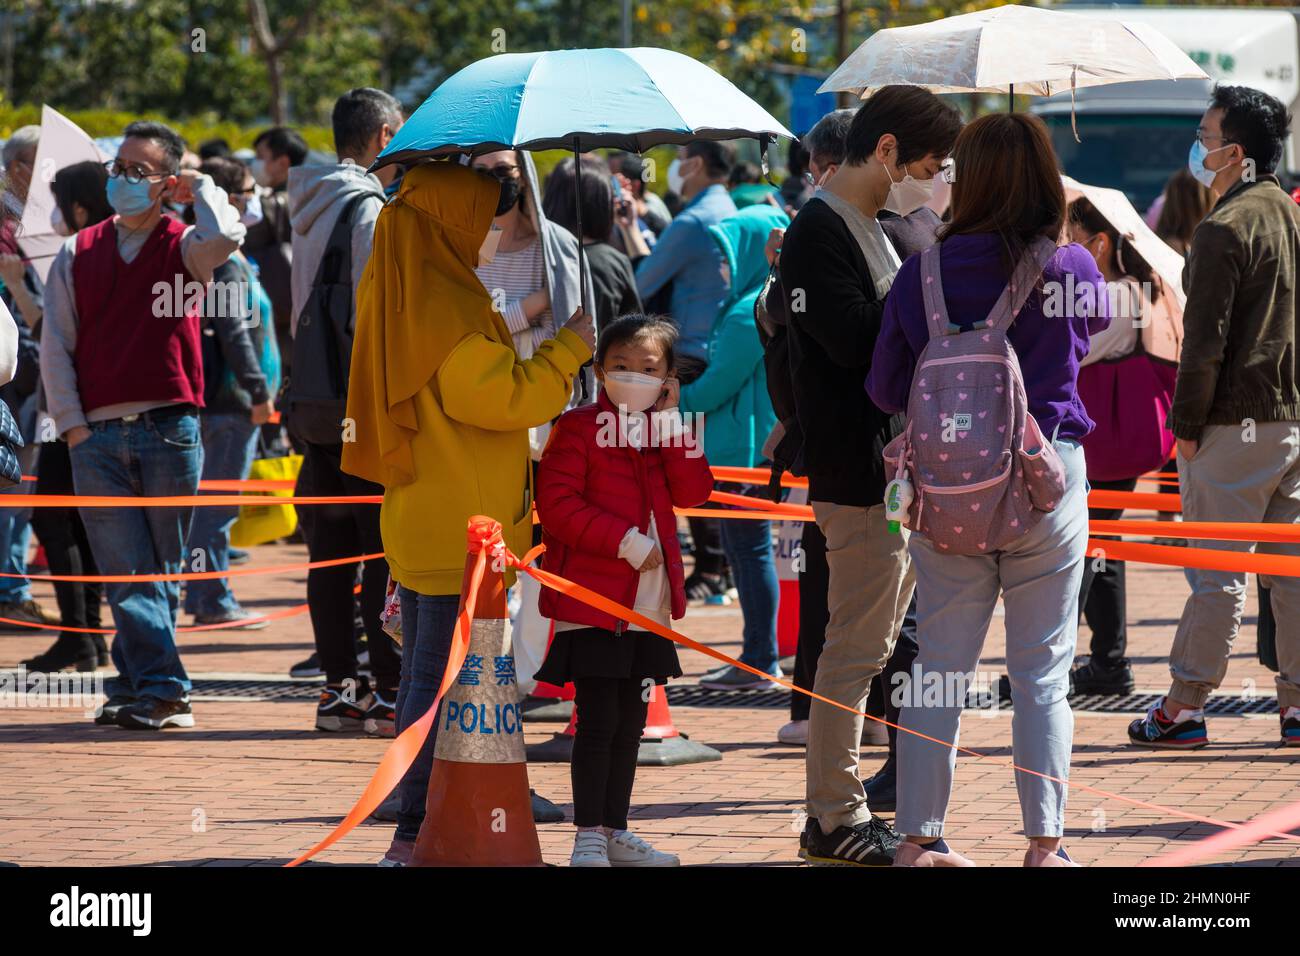 Hong Kong, China. 11th Feb, 2022. A domestic helper and the child she takes care of queue at a temporary COVID test centre in Edinburgh Place in Central Hong Kong. Many residents complained from having to gather with thousands of other people during an epidemic to take part in these mandatory tests. Credit: Marc R. Fernandes /Alamy Live News Stock Photo